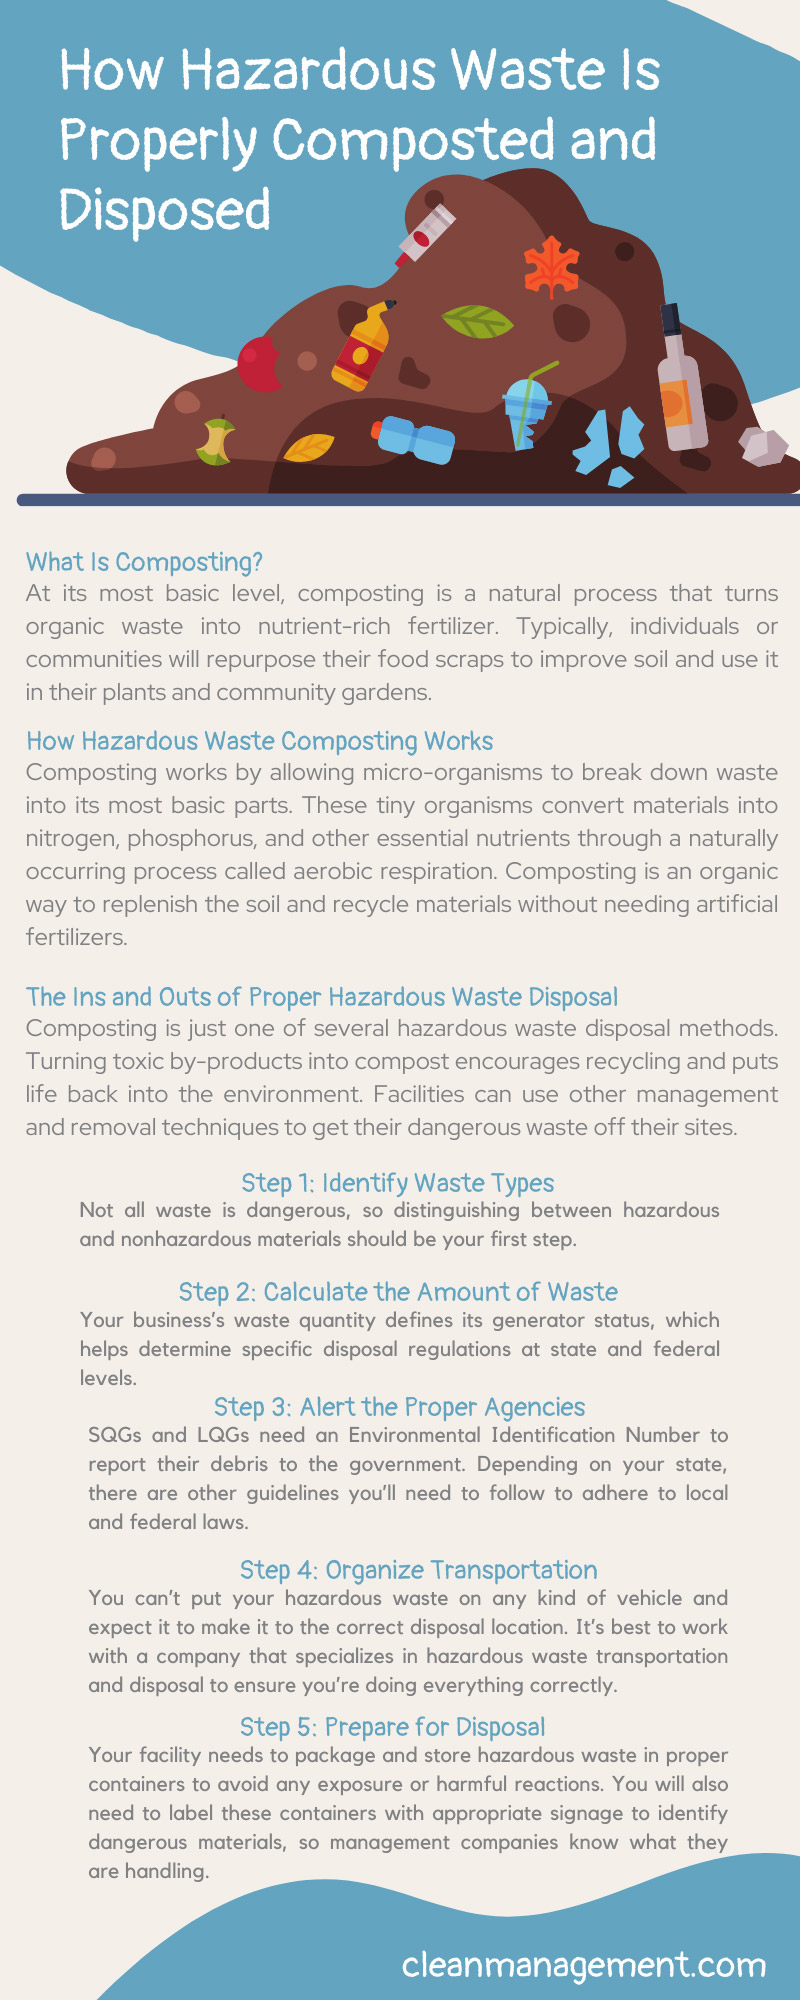 How Hazardous Waste Is Properly Composted and Disposed